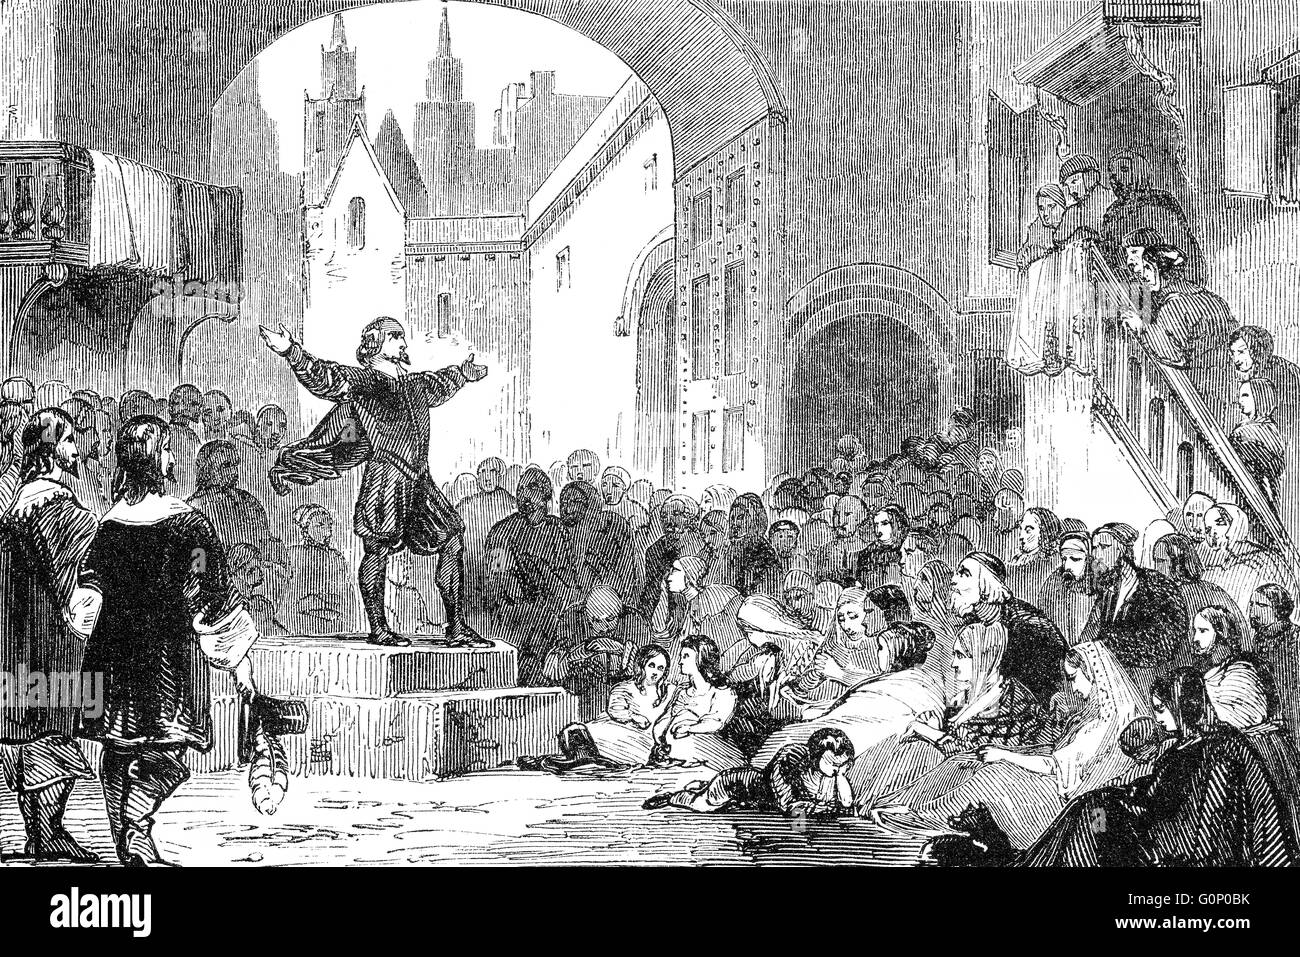 George Wishart, c. 1513-1546, a Scottish religious reformer, preaching in Dundee, 1545, Scotland Stock Photo